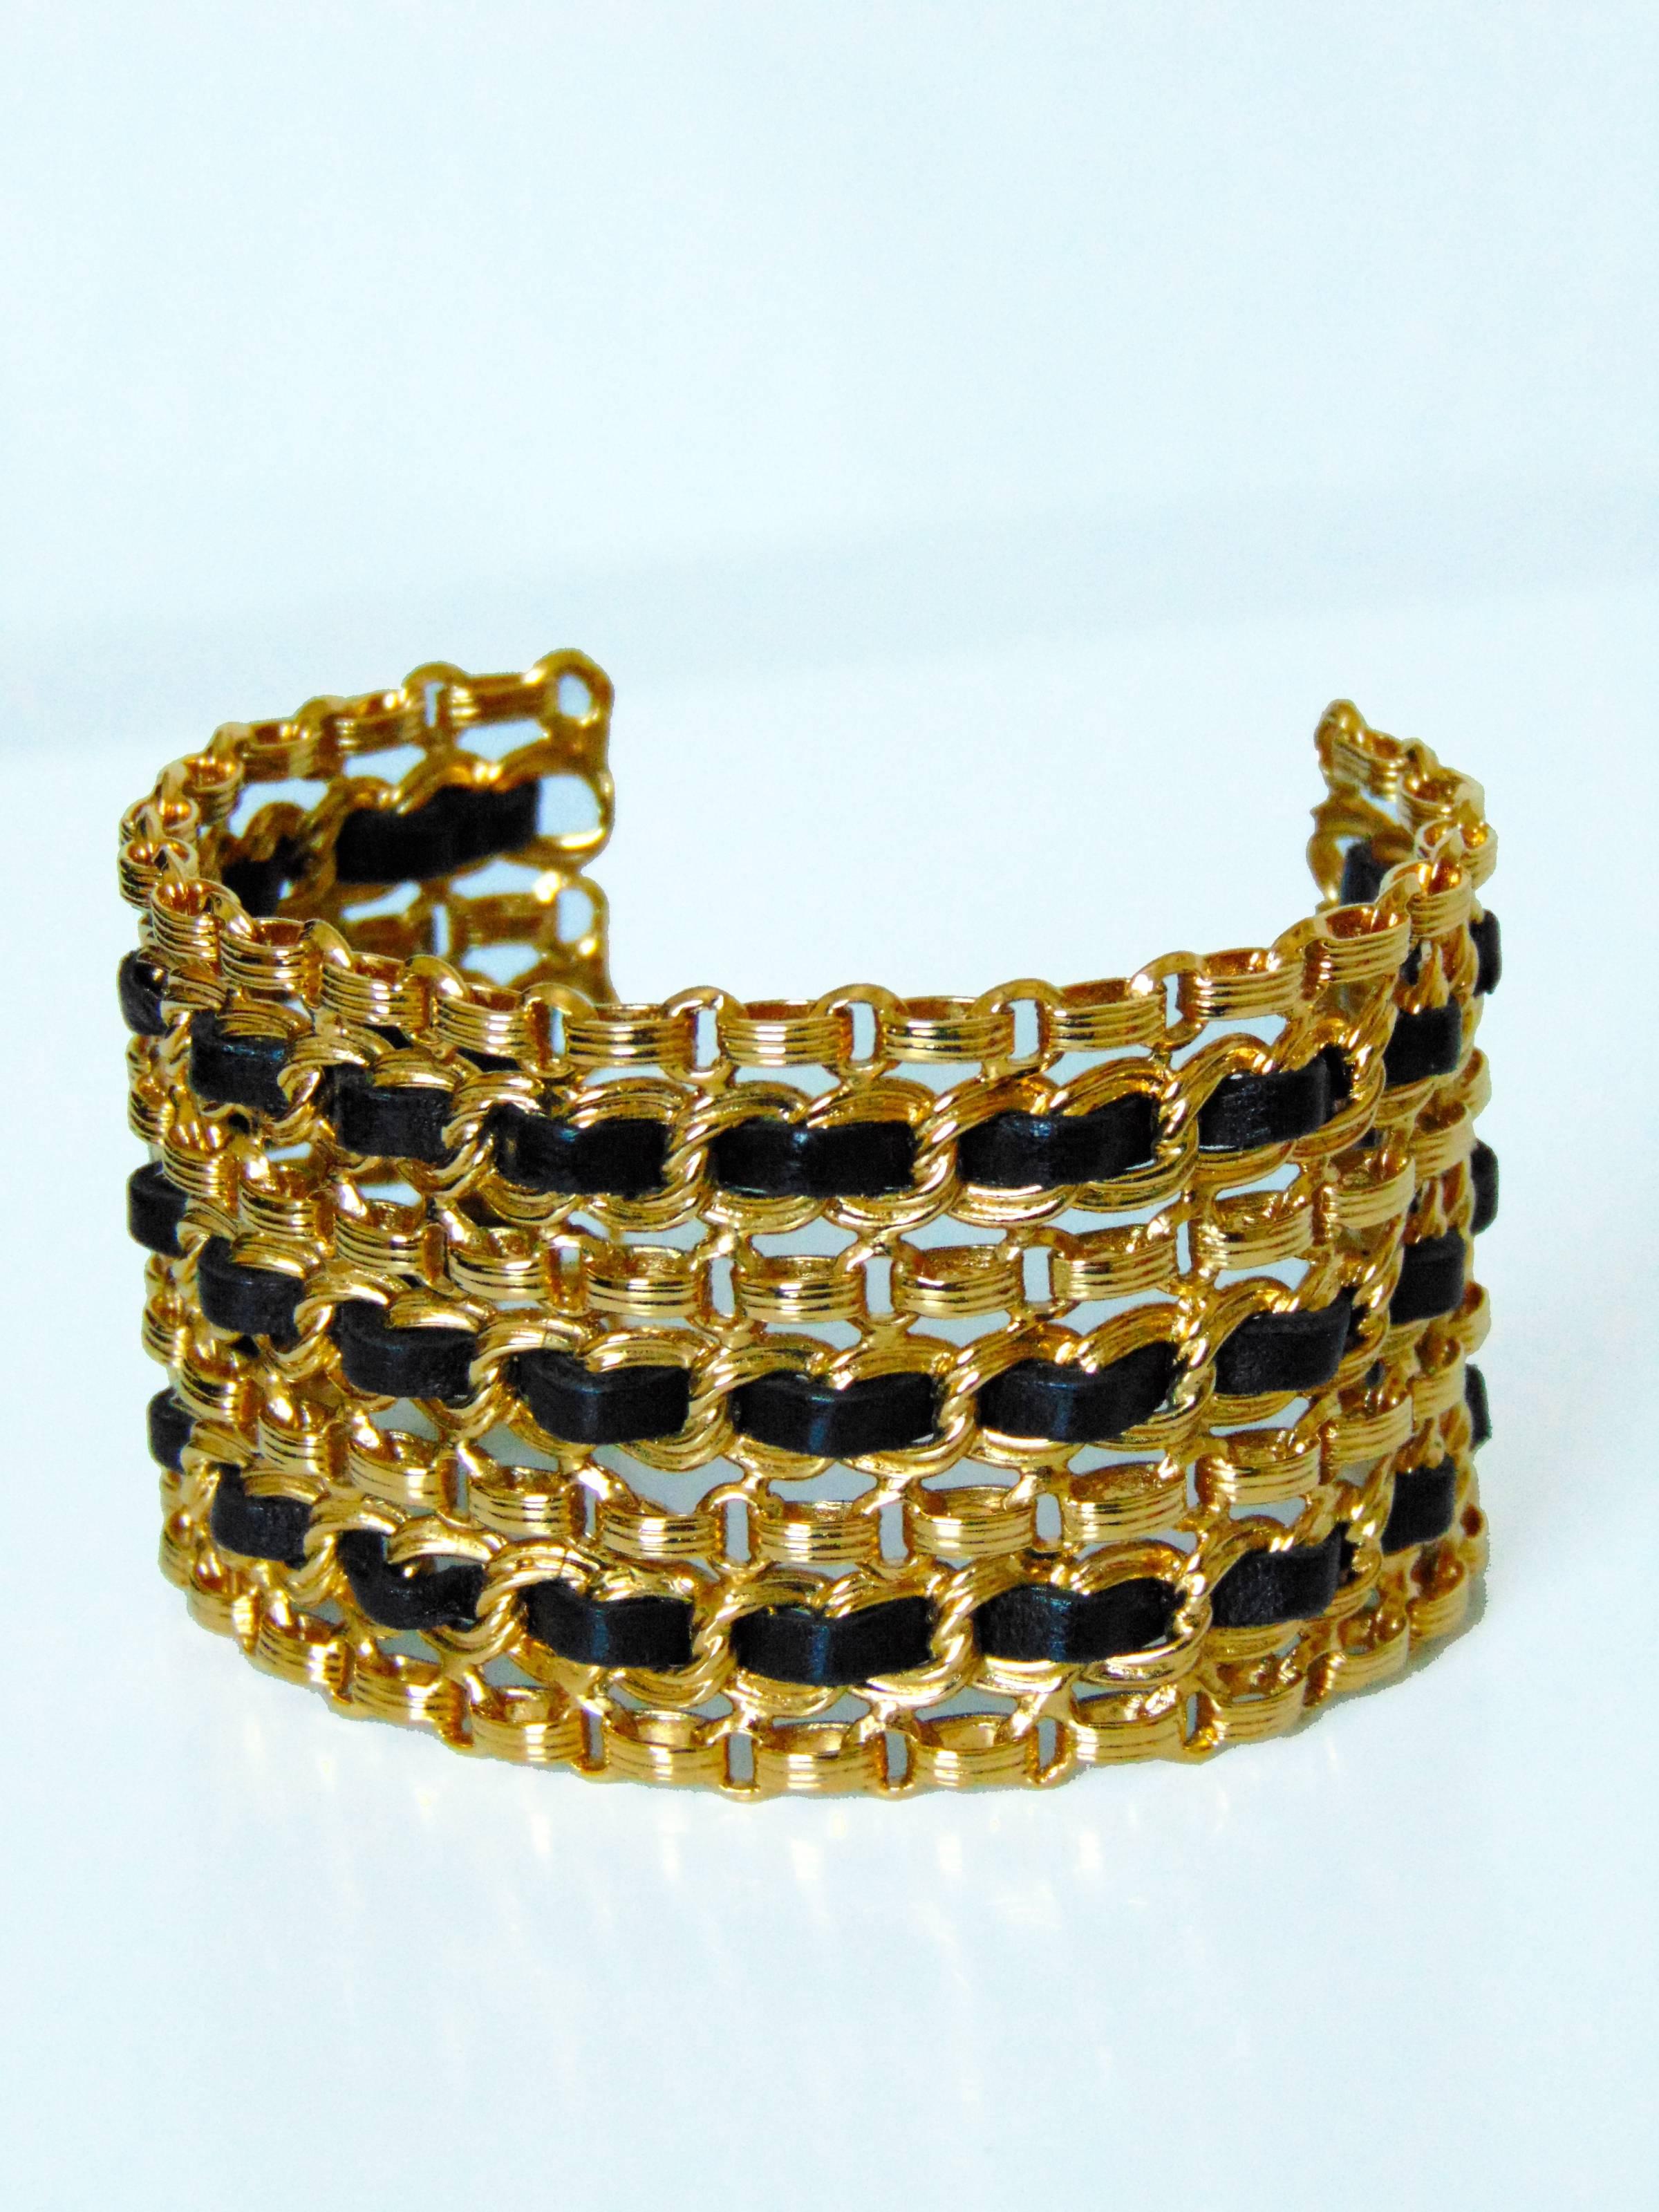 This fabulous wide cuff bracelet was made by Chanel, likely in the early 1980s, Made from gold metal chains, it features black leather strips interwoven throughout.  In excellent condition.  It measures appx 2.75in diameter x 2in H.  Stamped CHANEL.